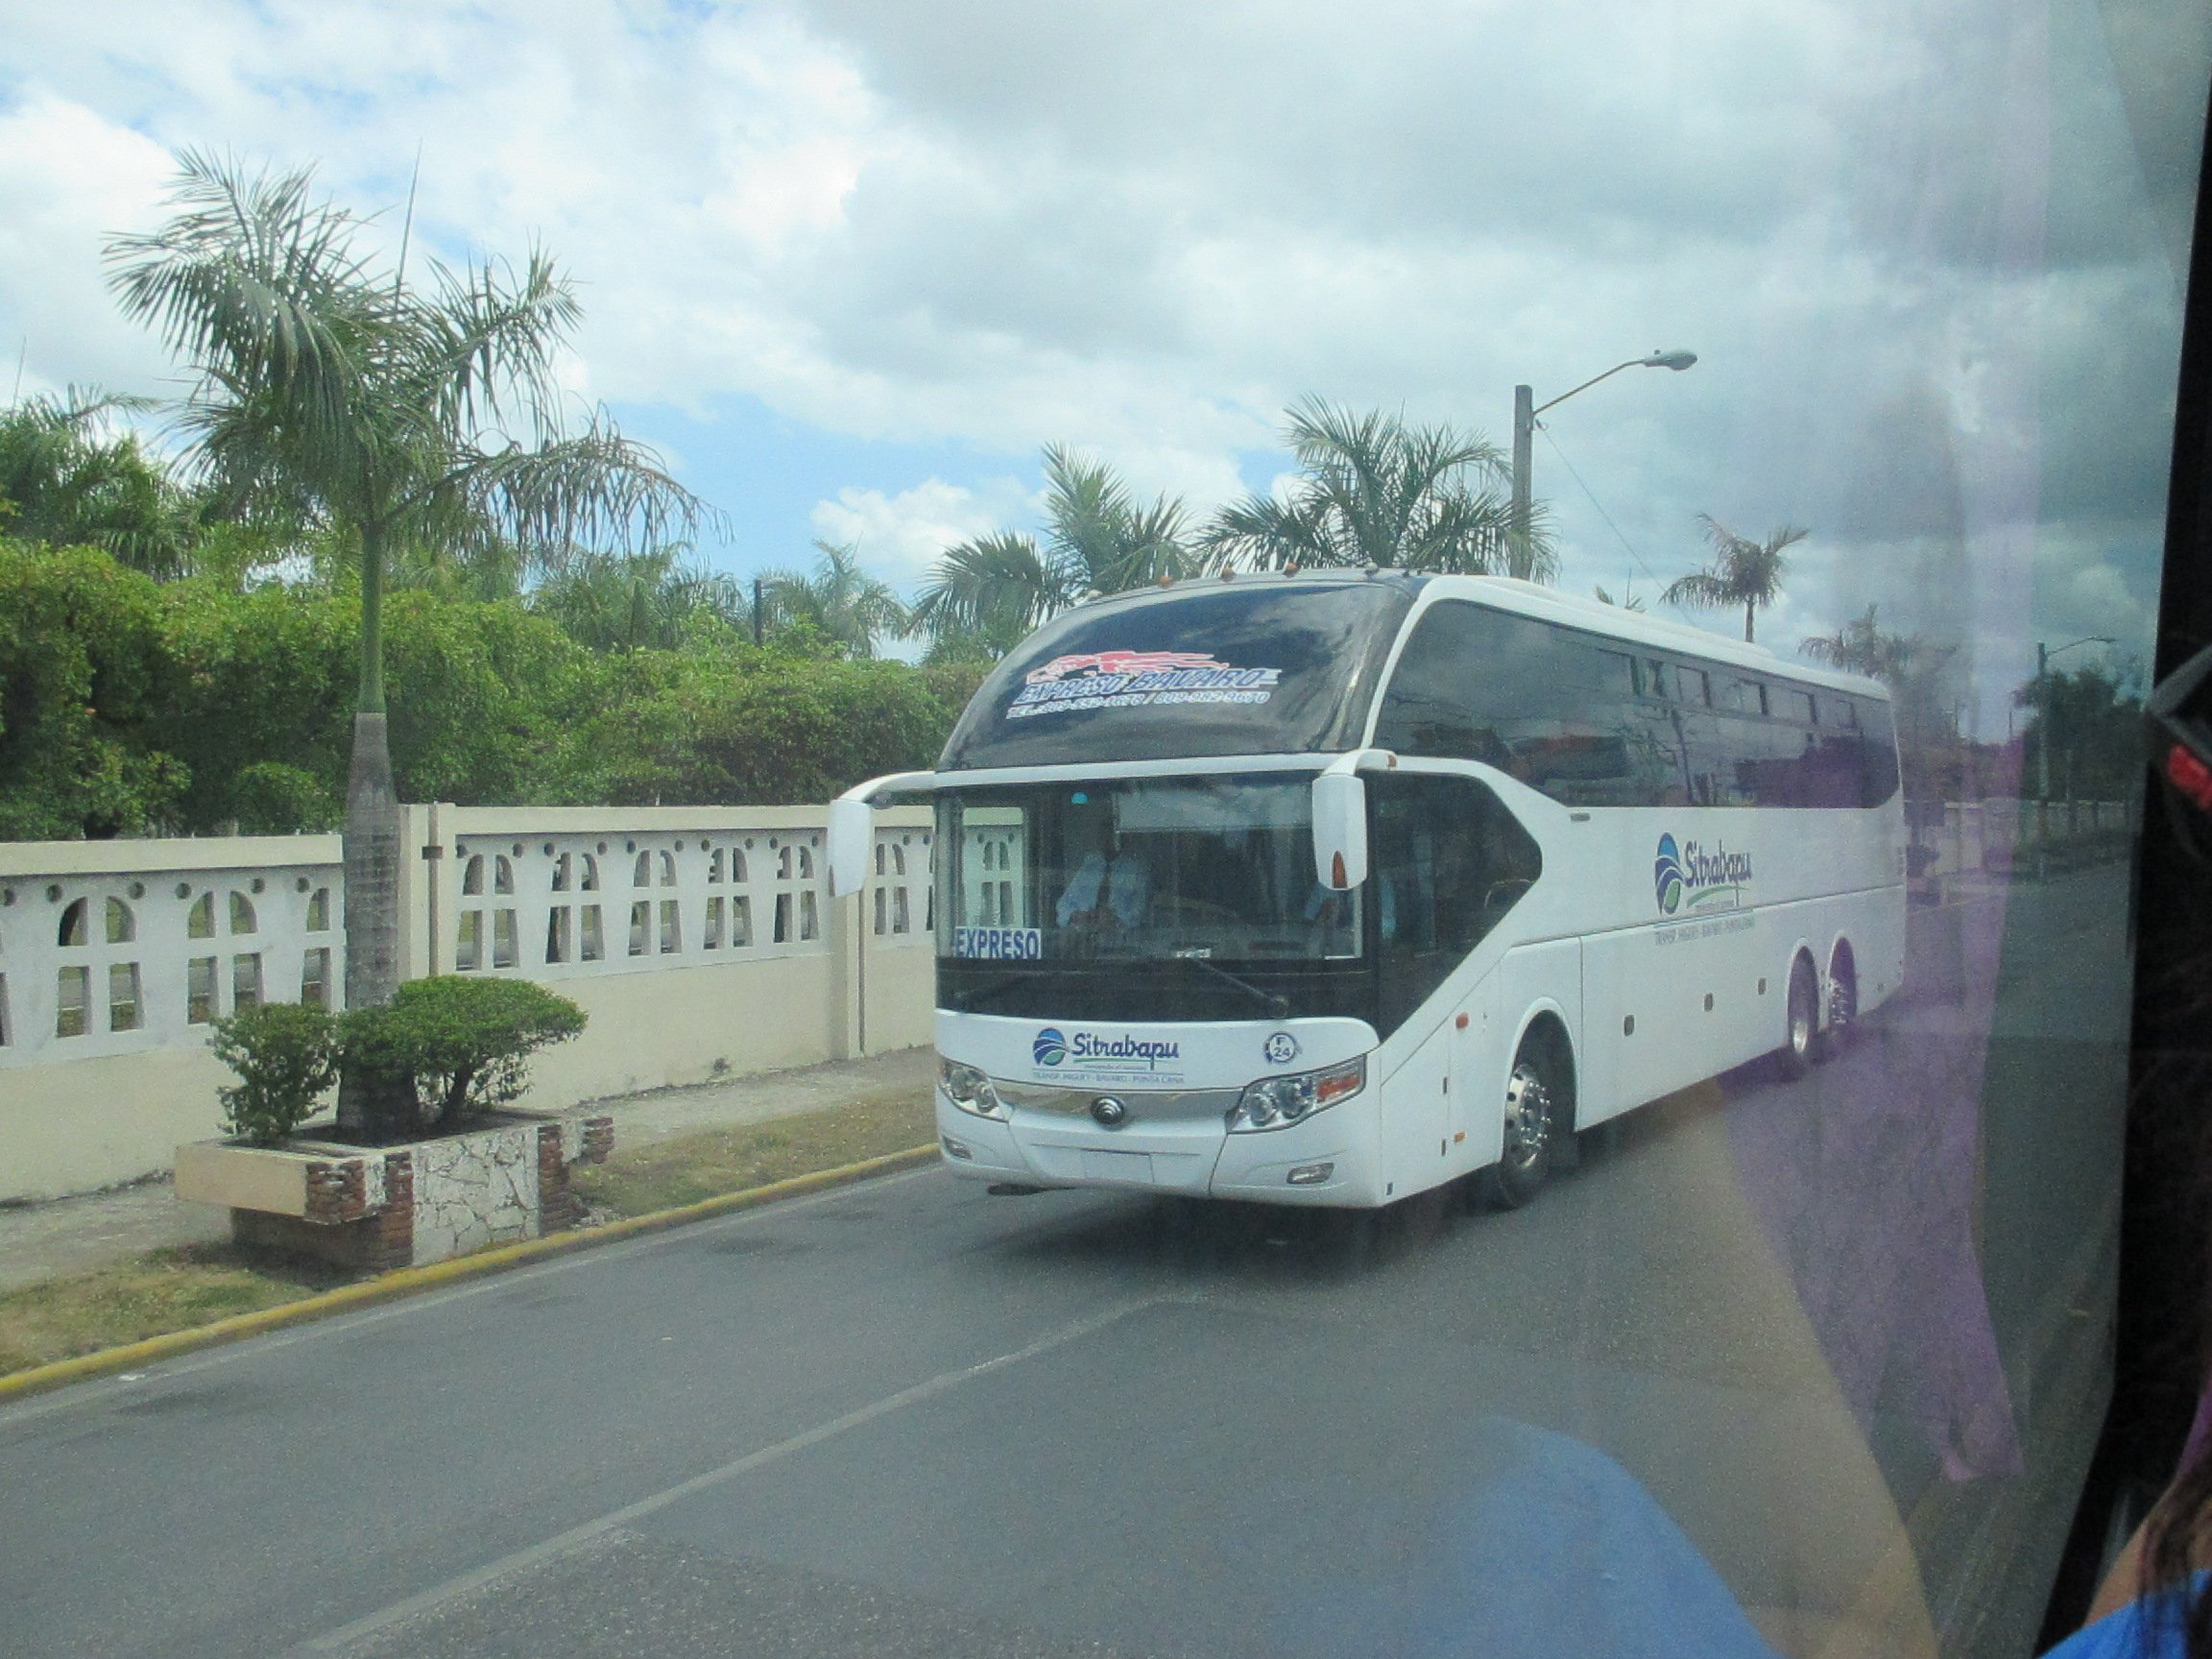 BUSES FROM PUNTA CANA AIRPORT TO BAVARO BEACH. LOCAL BUSES DOMINICAN REPUBLIC, TRAMABAPU or SITRABAPU